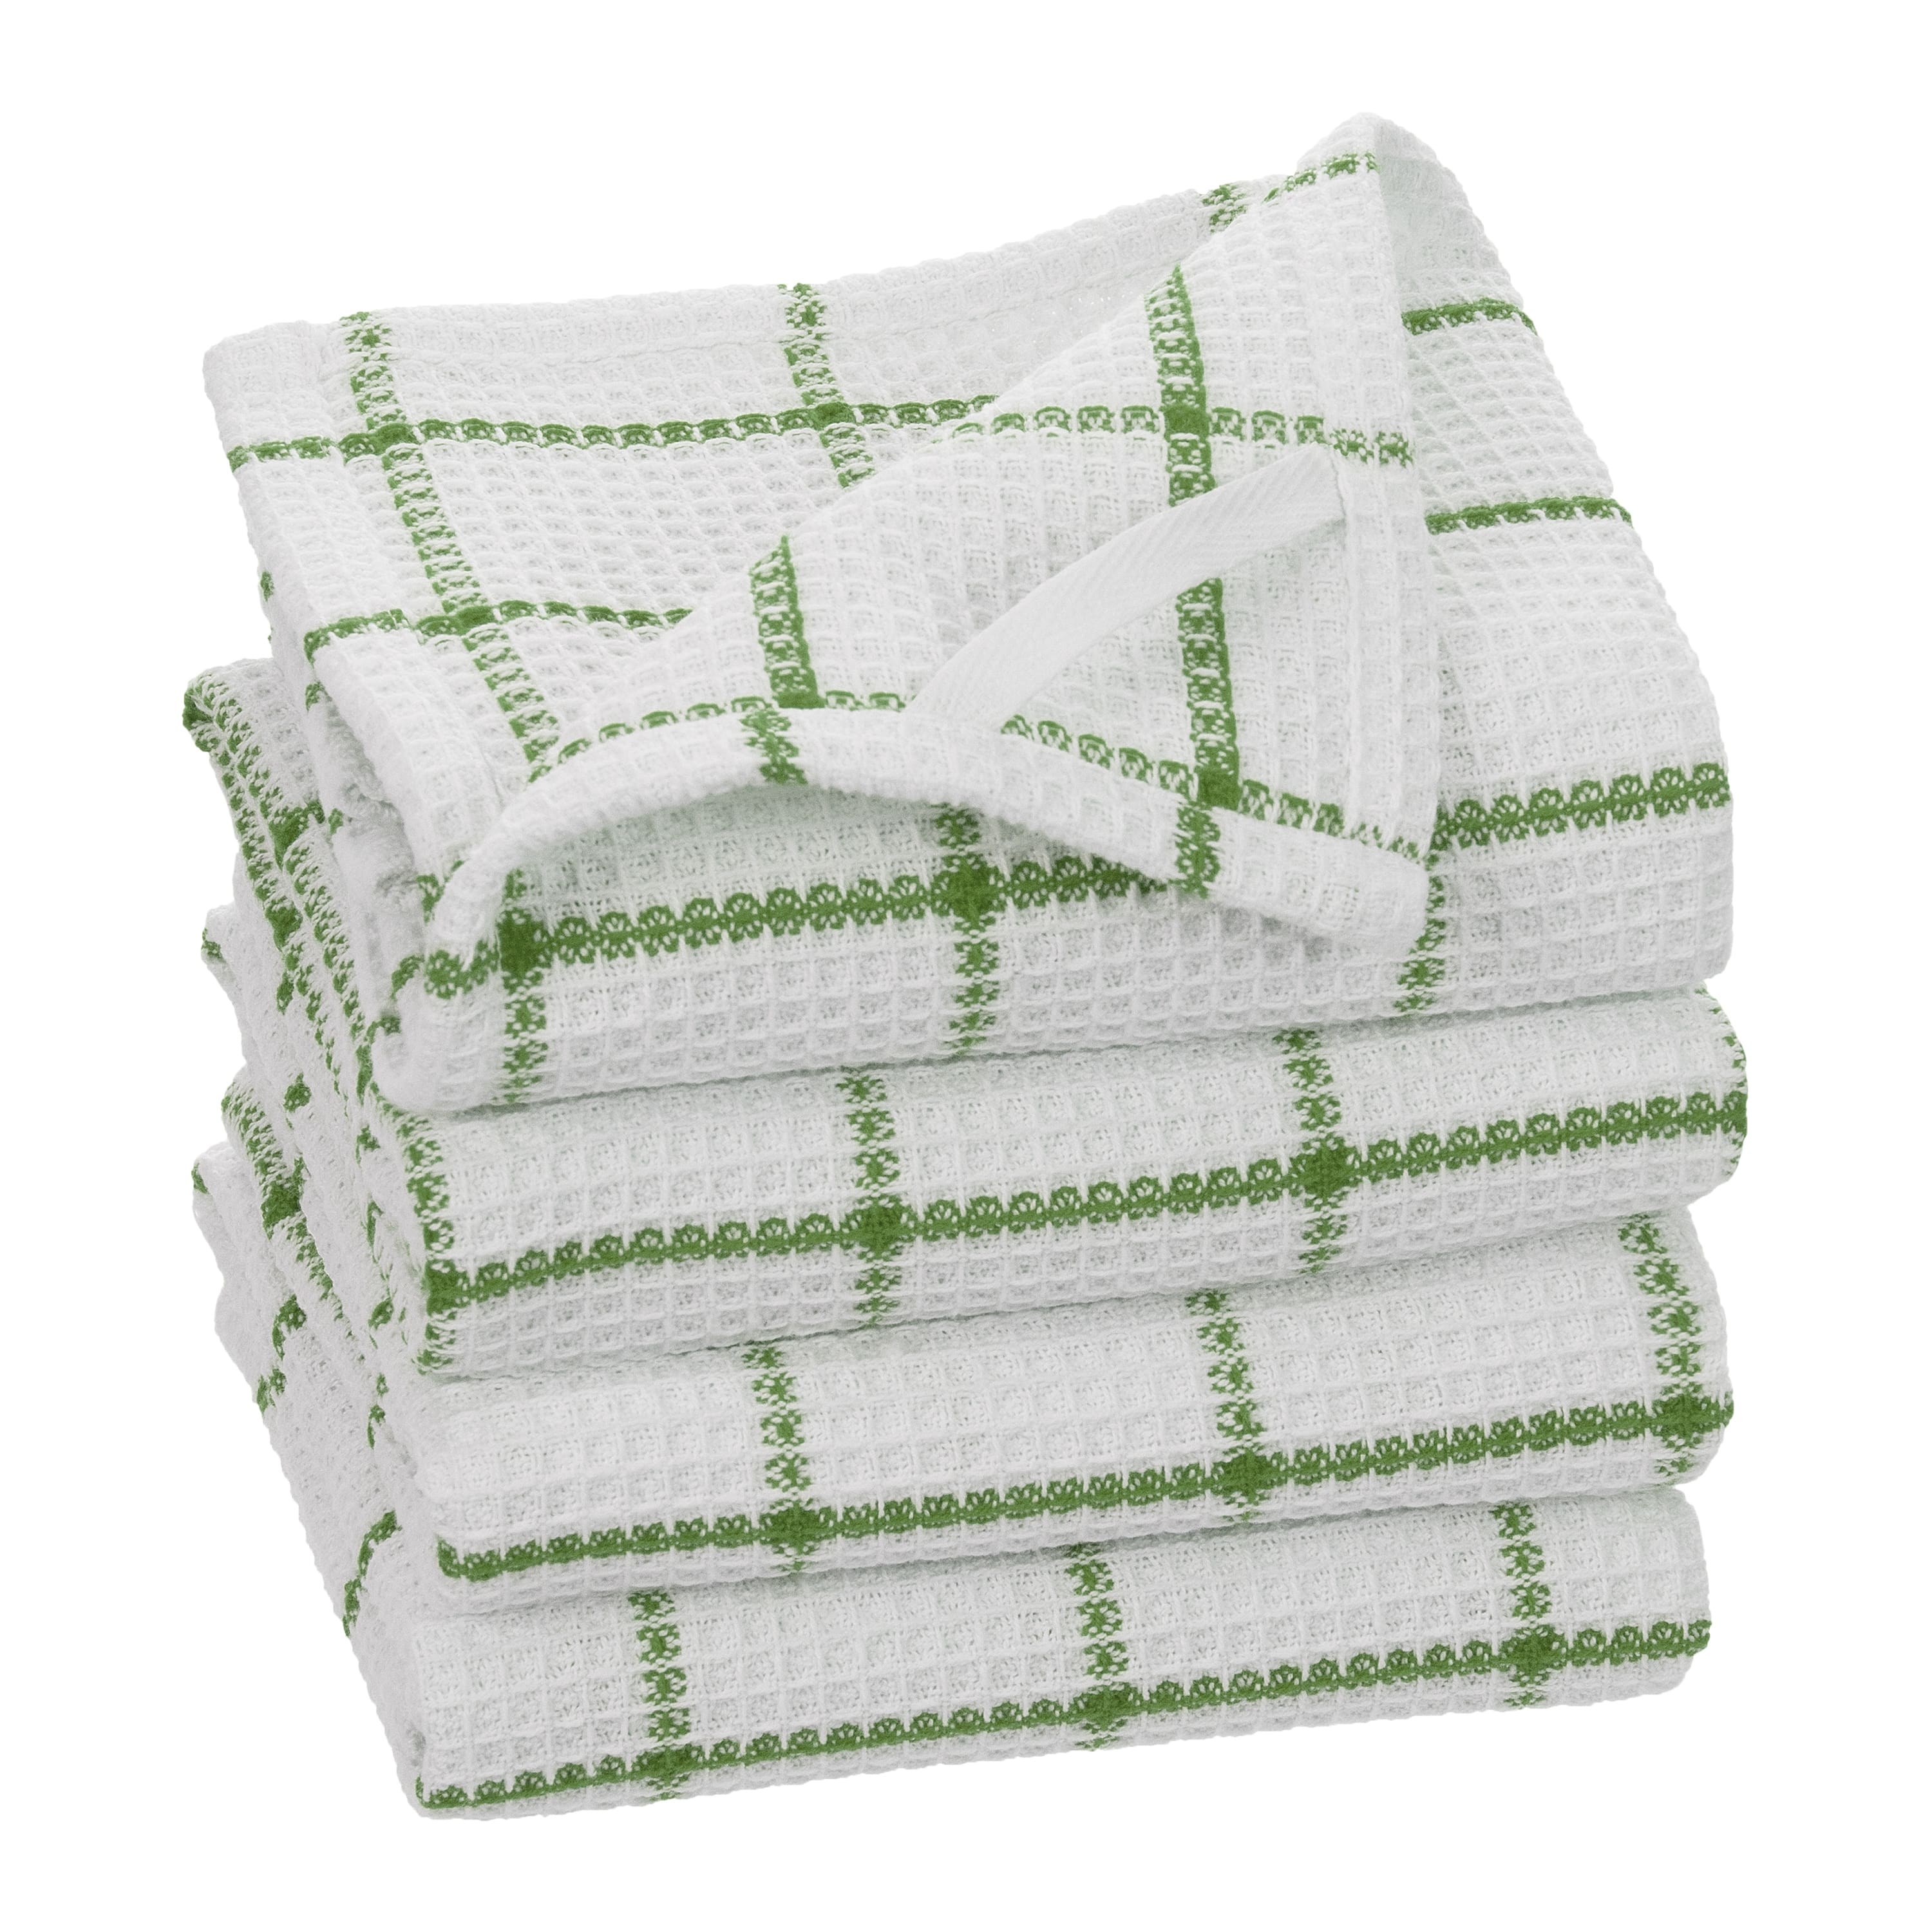 https://ak1.ostkcdn.com/images/products/is/images/direct/b438e25aa758c17f34e1bfcf42b3701cb152f891/Fabstyles-Solo-Waffle-Cotton-Kitchen-Towel-Set-of-4.jpg